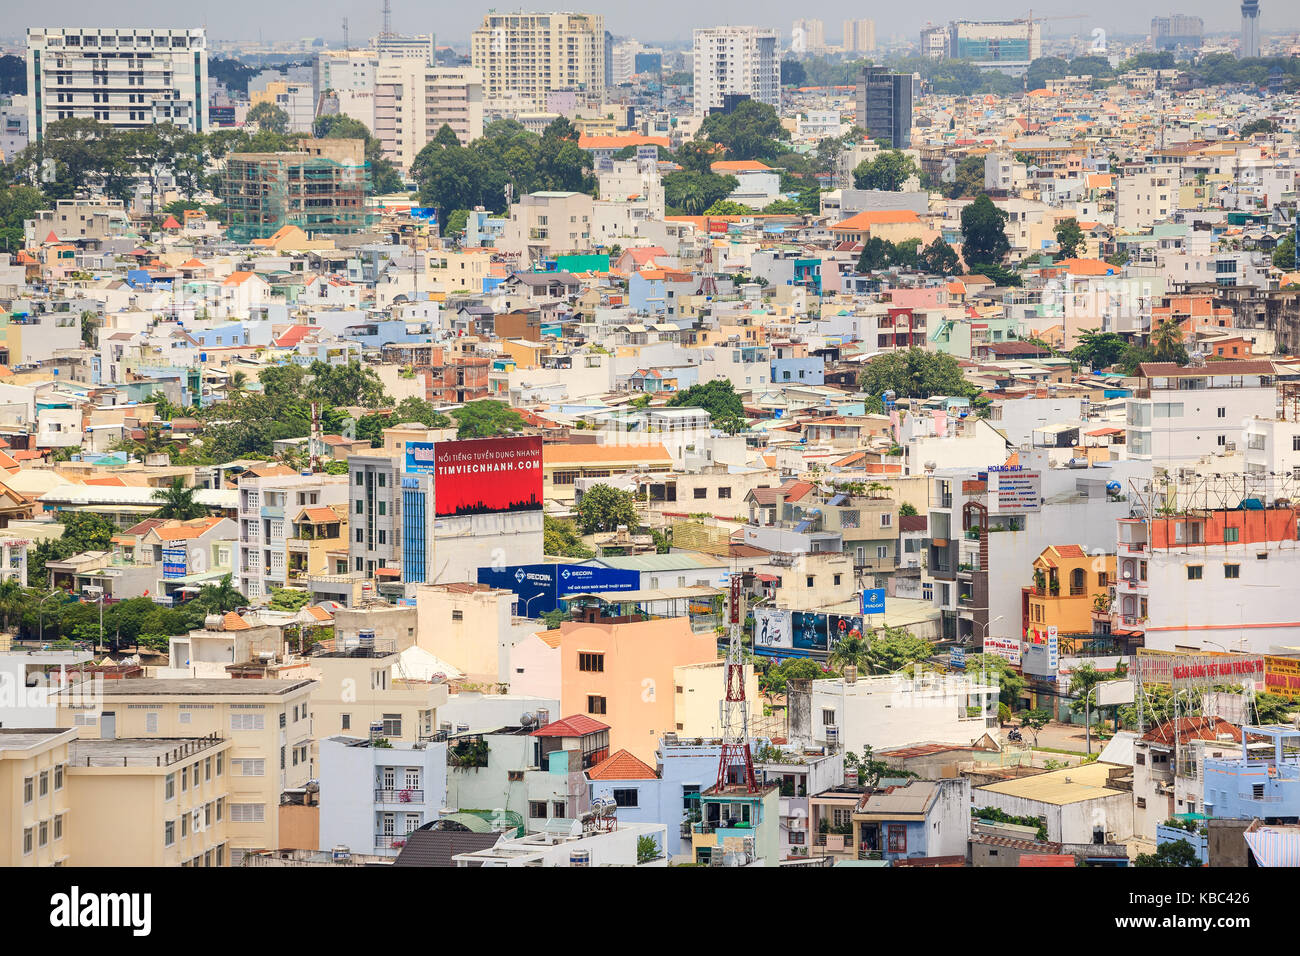 Ho Chi Minh city (or Saigon) skyline with colorful house, Vietnam. Saigon is the biggest city and economic center in Vietnam. Stock Photo